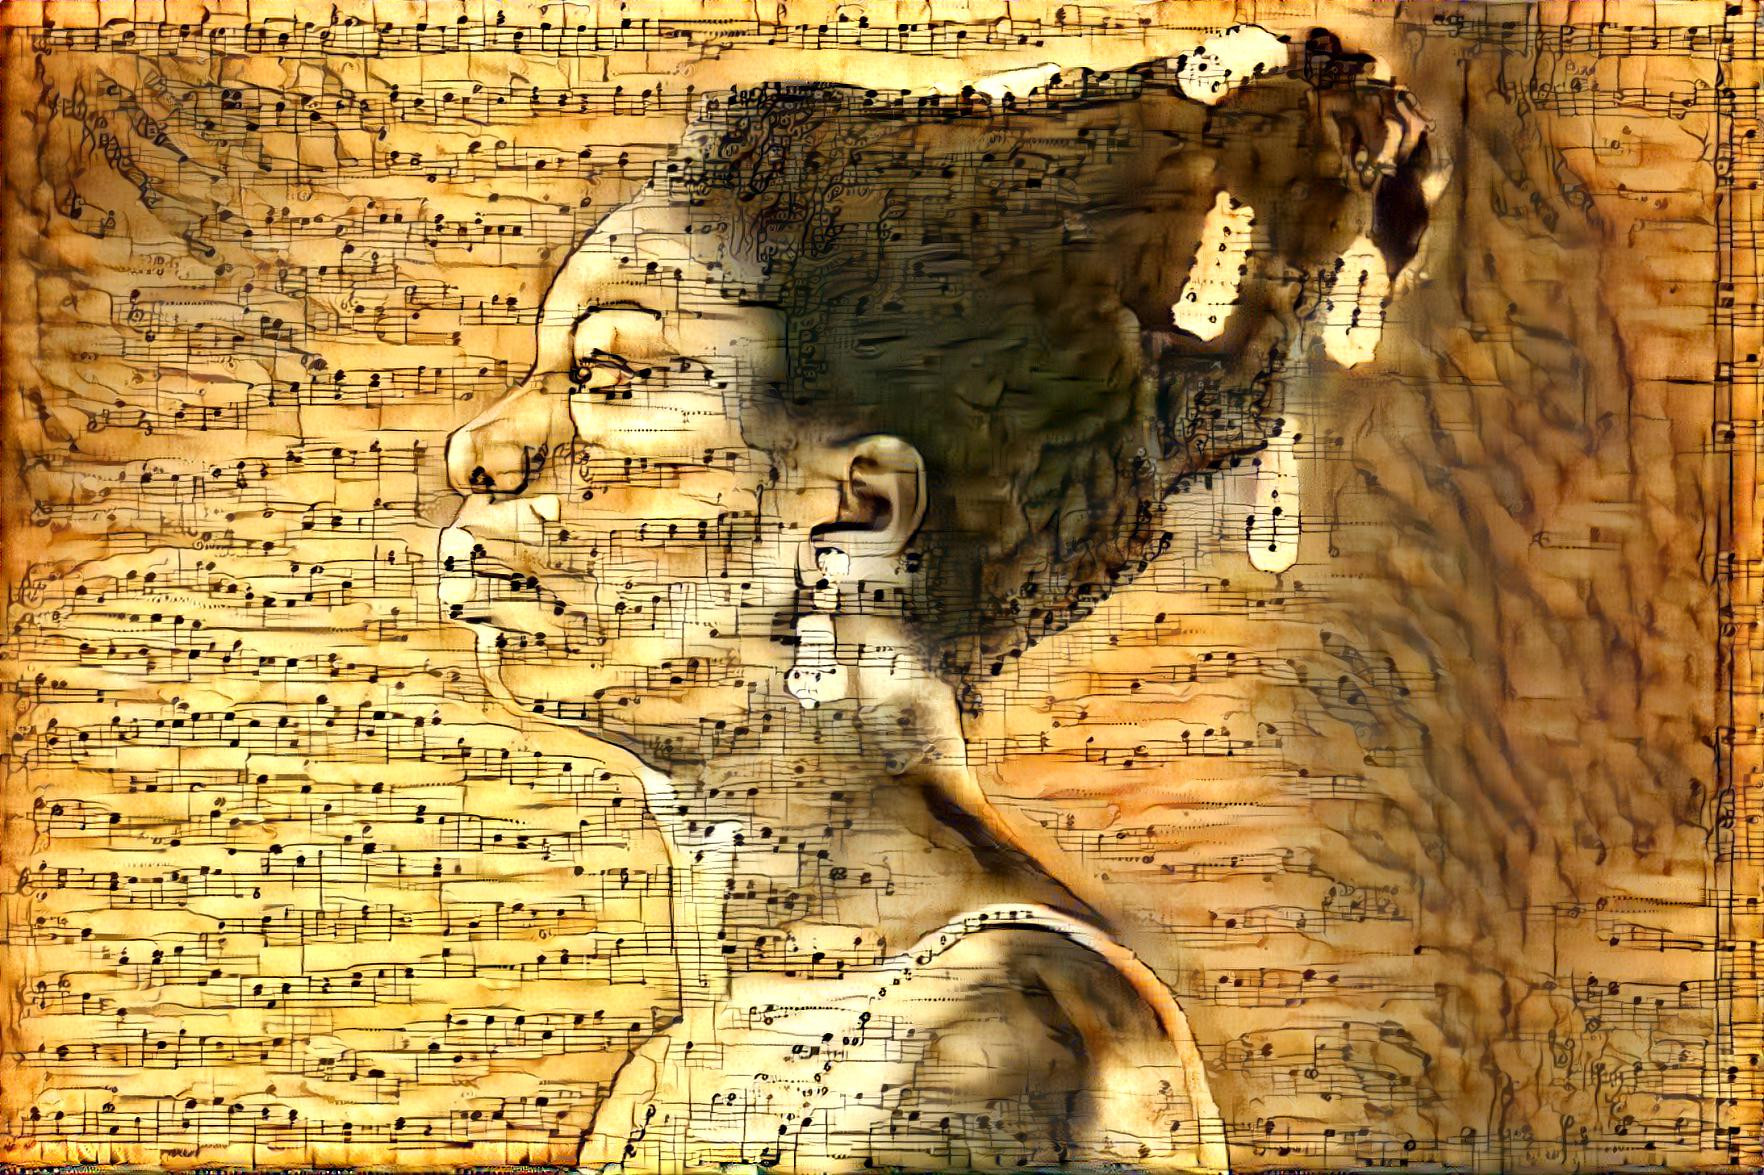 Deep Dream inspired by image of the great musical legend Nina Simone. She was a force of artistic integrity, passion and a desire to stir the conversation for true Civil Rights.